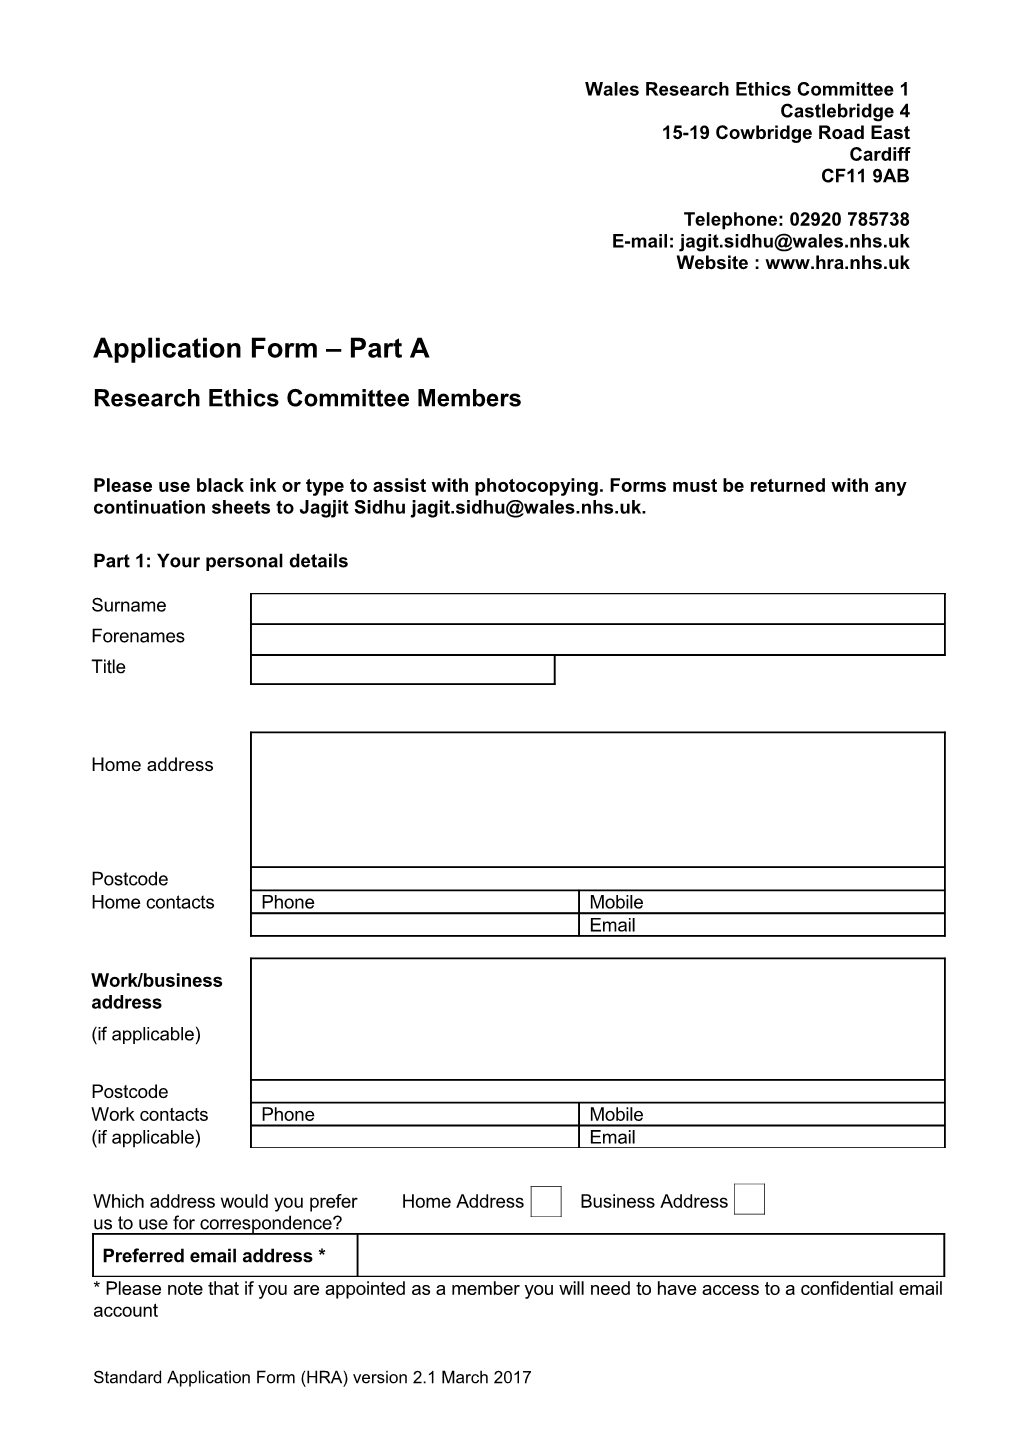 Multi-Centre Research Ethics Committee for Wales